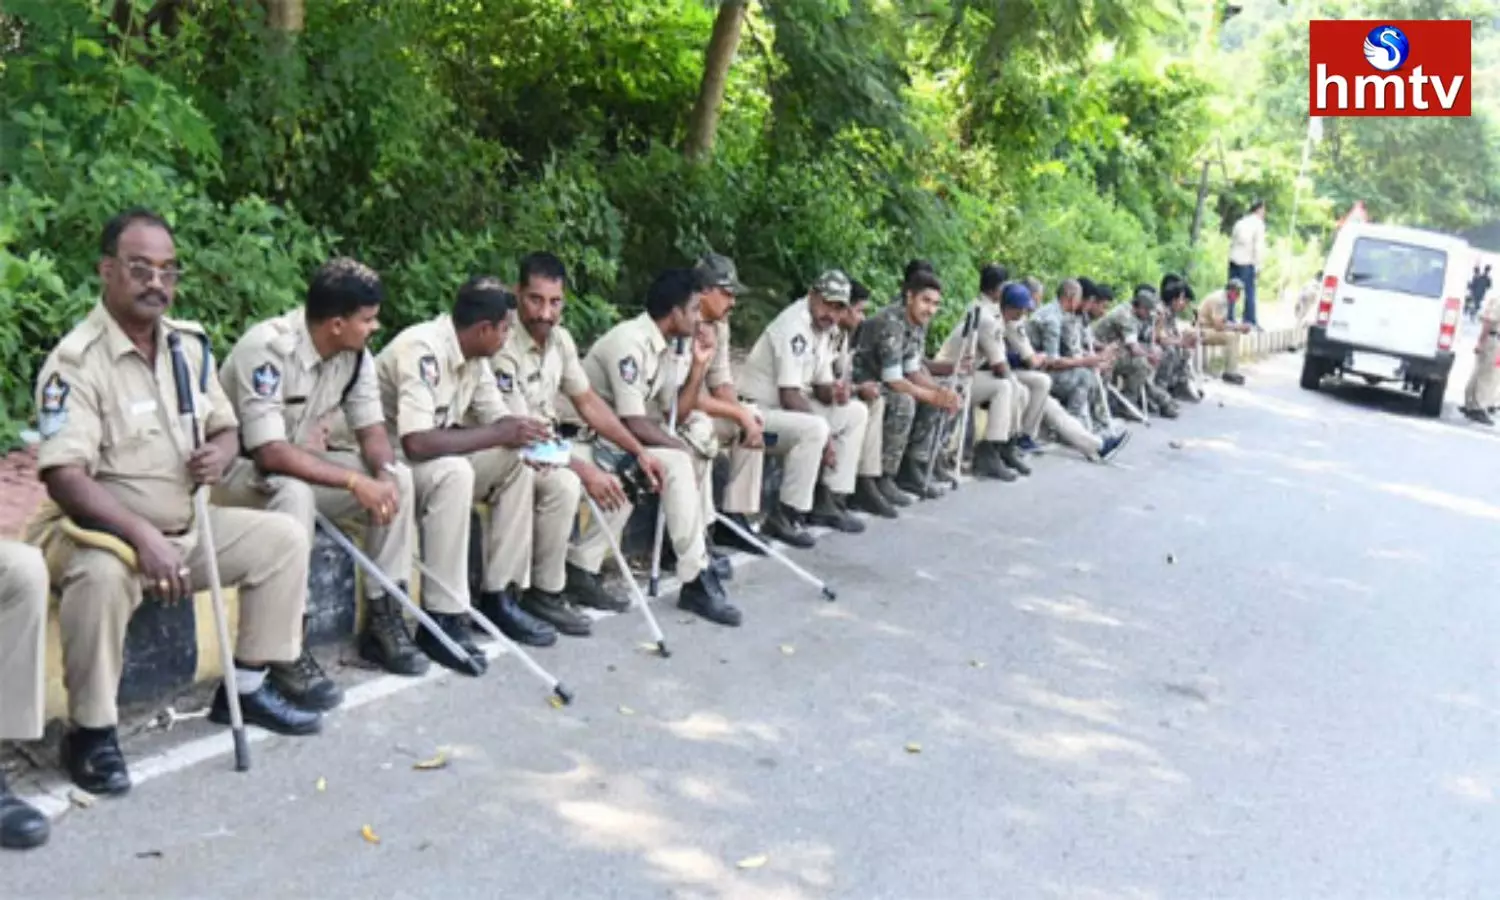 Heavy Police Security in the Surrounding Areas of Rushikonda